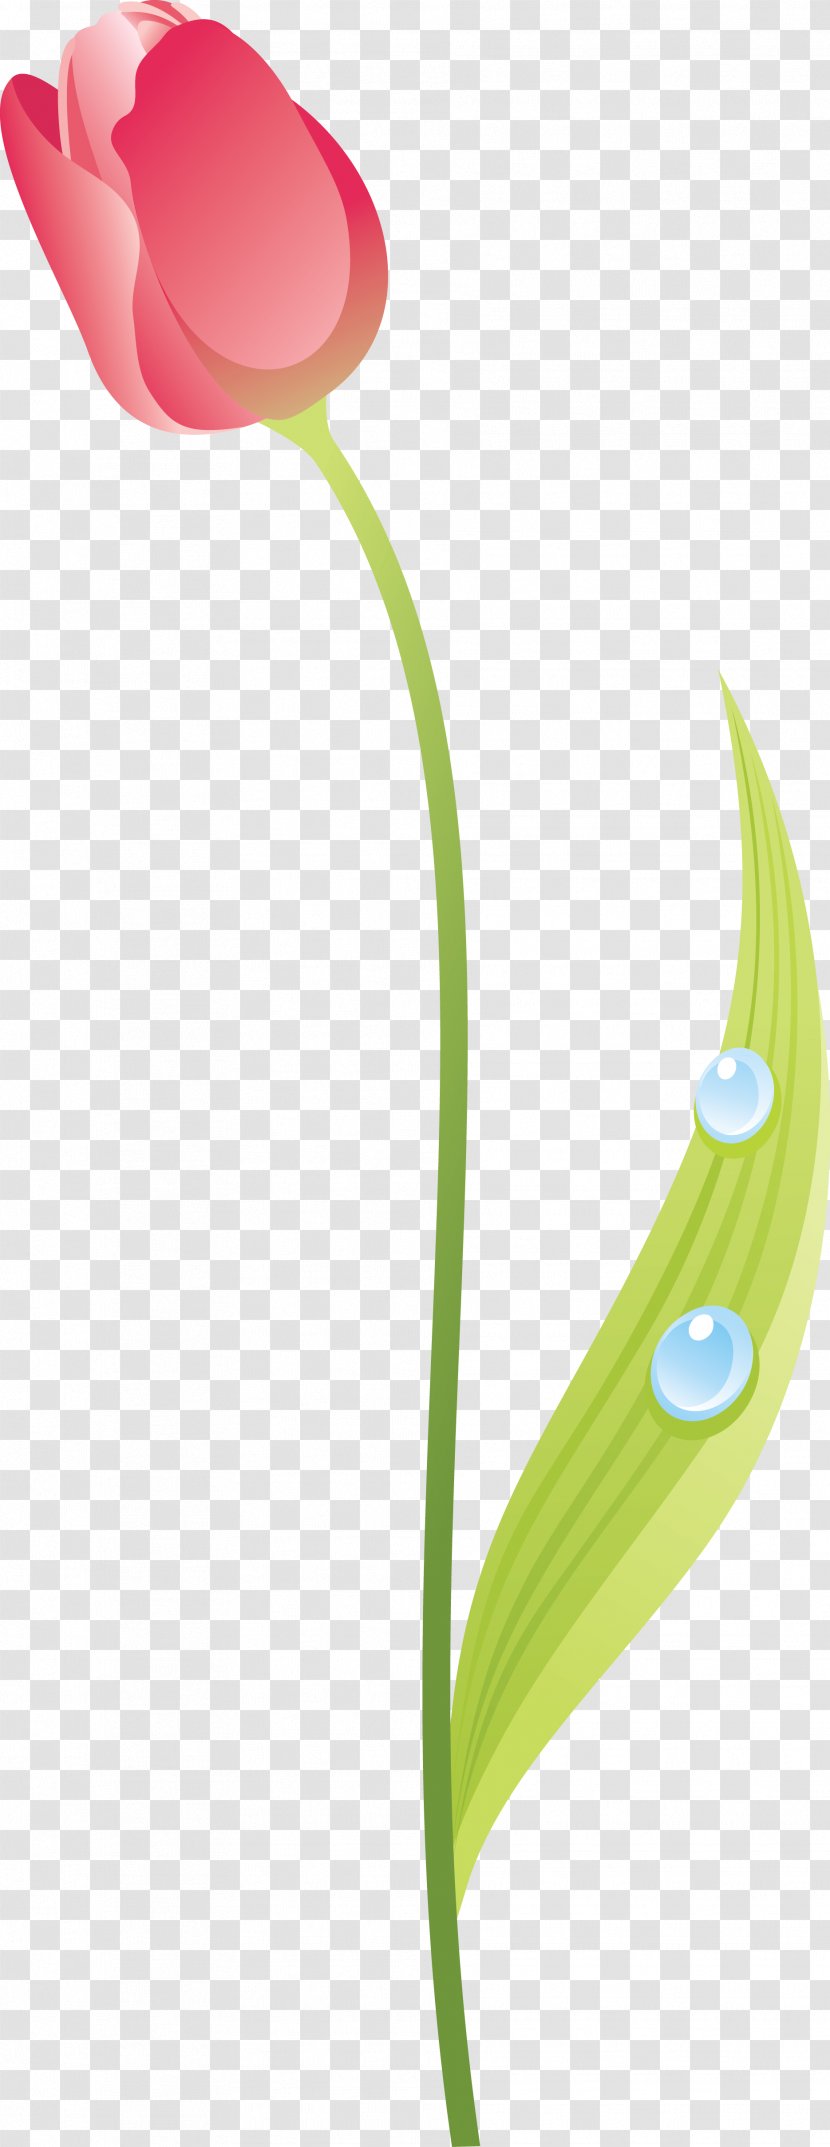 Flowering Plant Tulip Liliaceae - Seed Transparent PNG